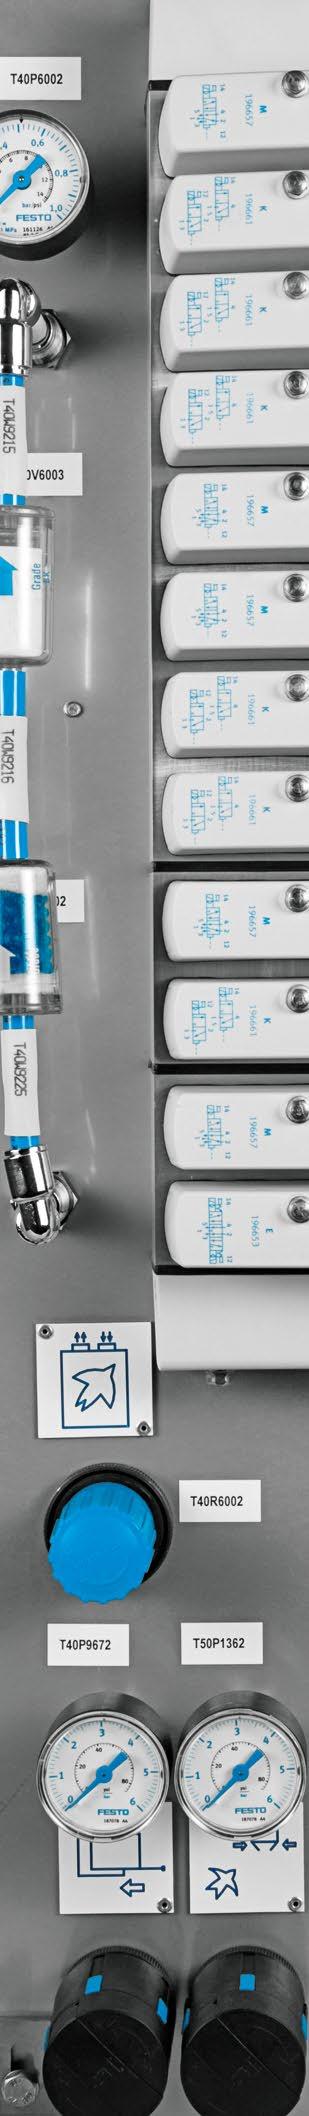 Control Cabinets solutions for Water Treatment Process Valve Assemblies